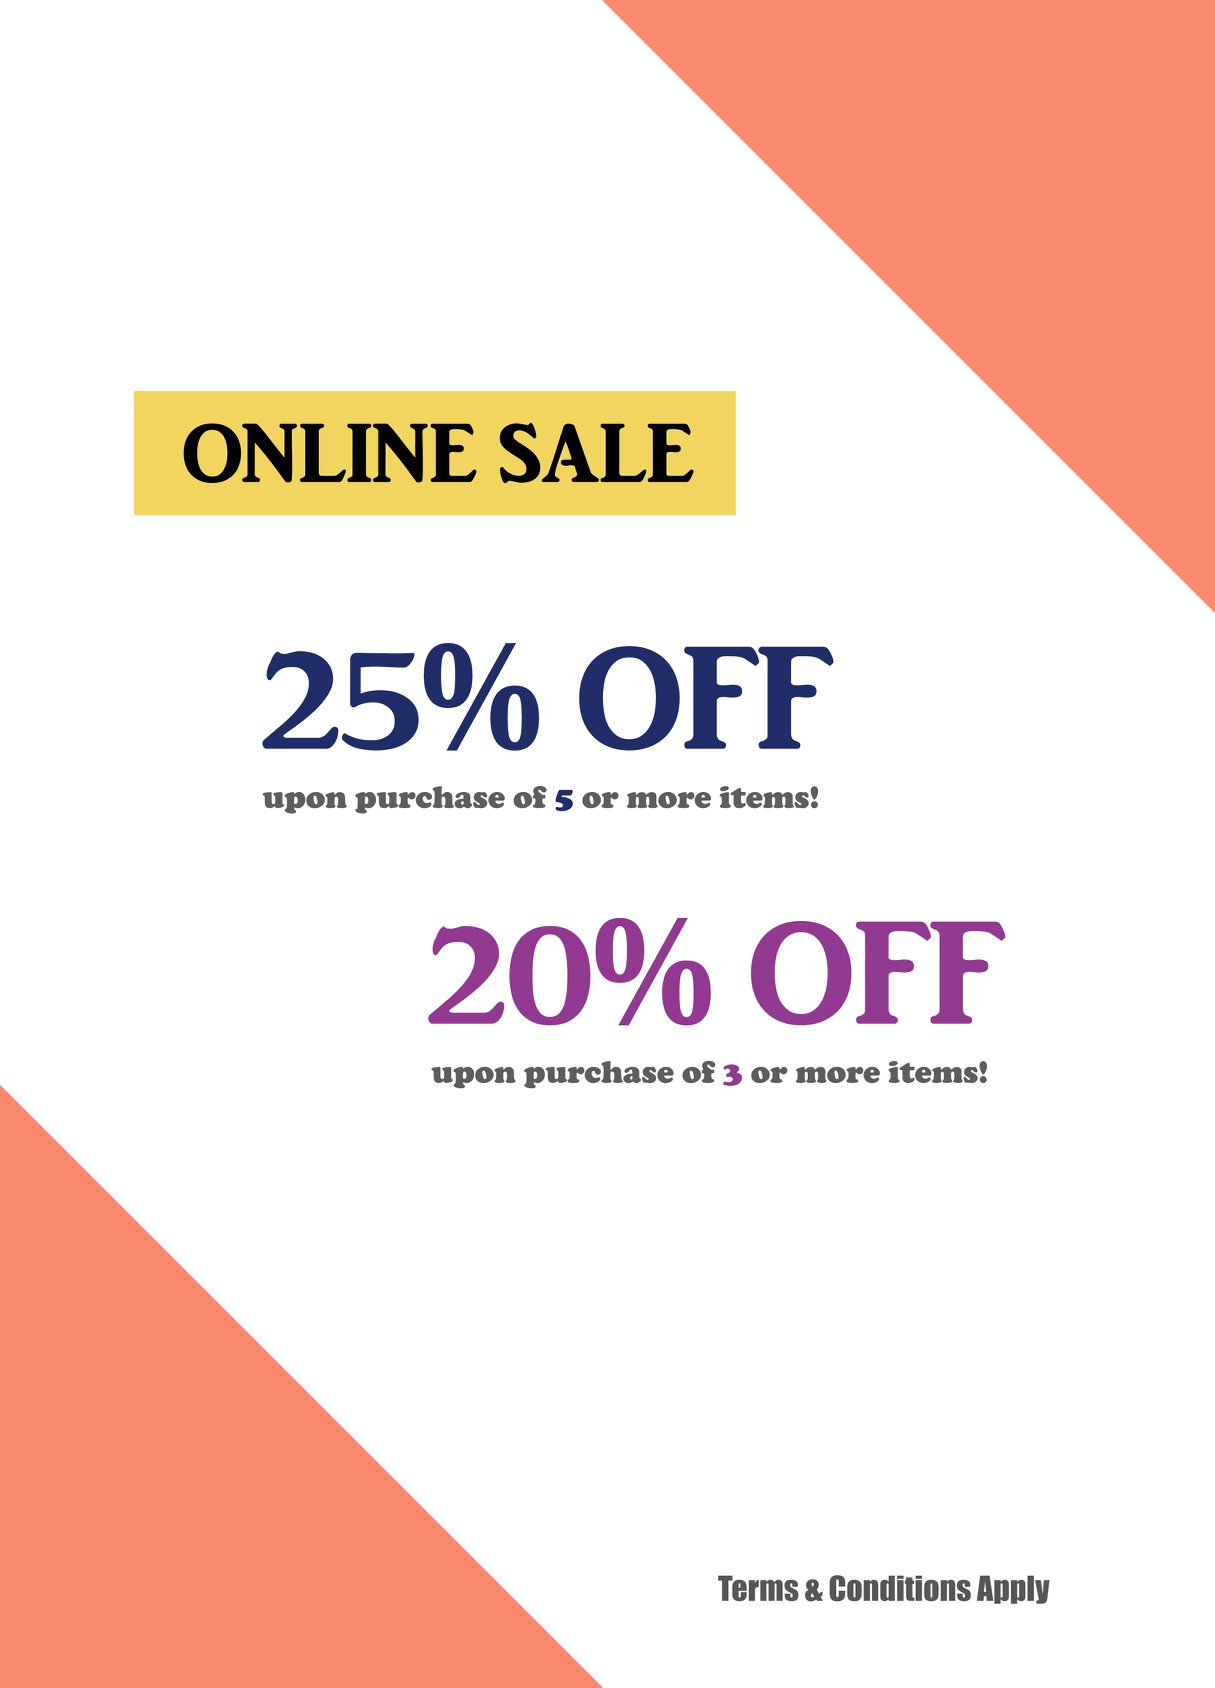 In responding to popular demand, the exclusive online sale period will be extended until 2 March, ! Enjoy EXTRA 25% OFF upon purchase of 5 pcs or more (including discounted items) by entering the code "EXTRA25" before payment